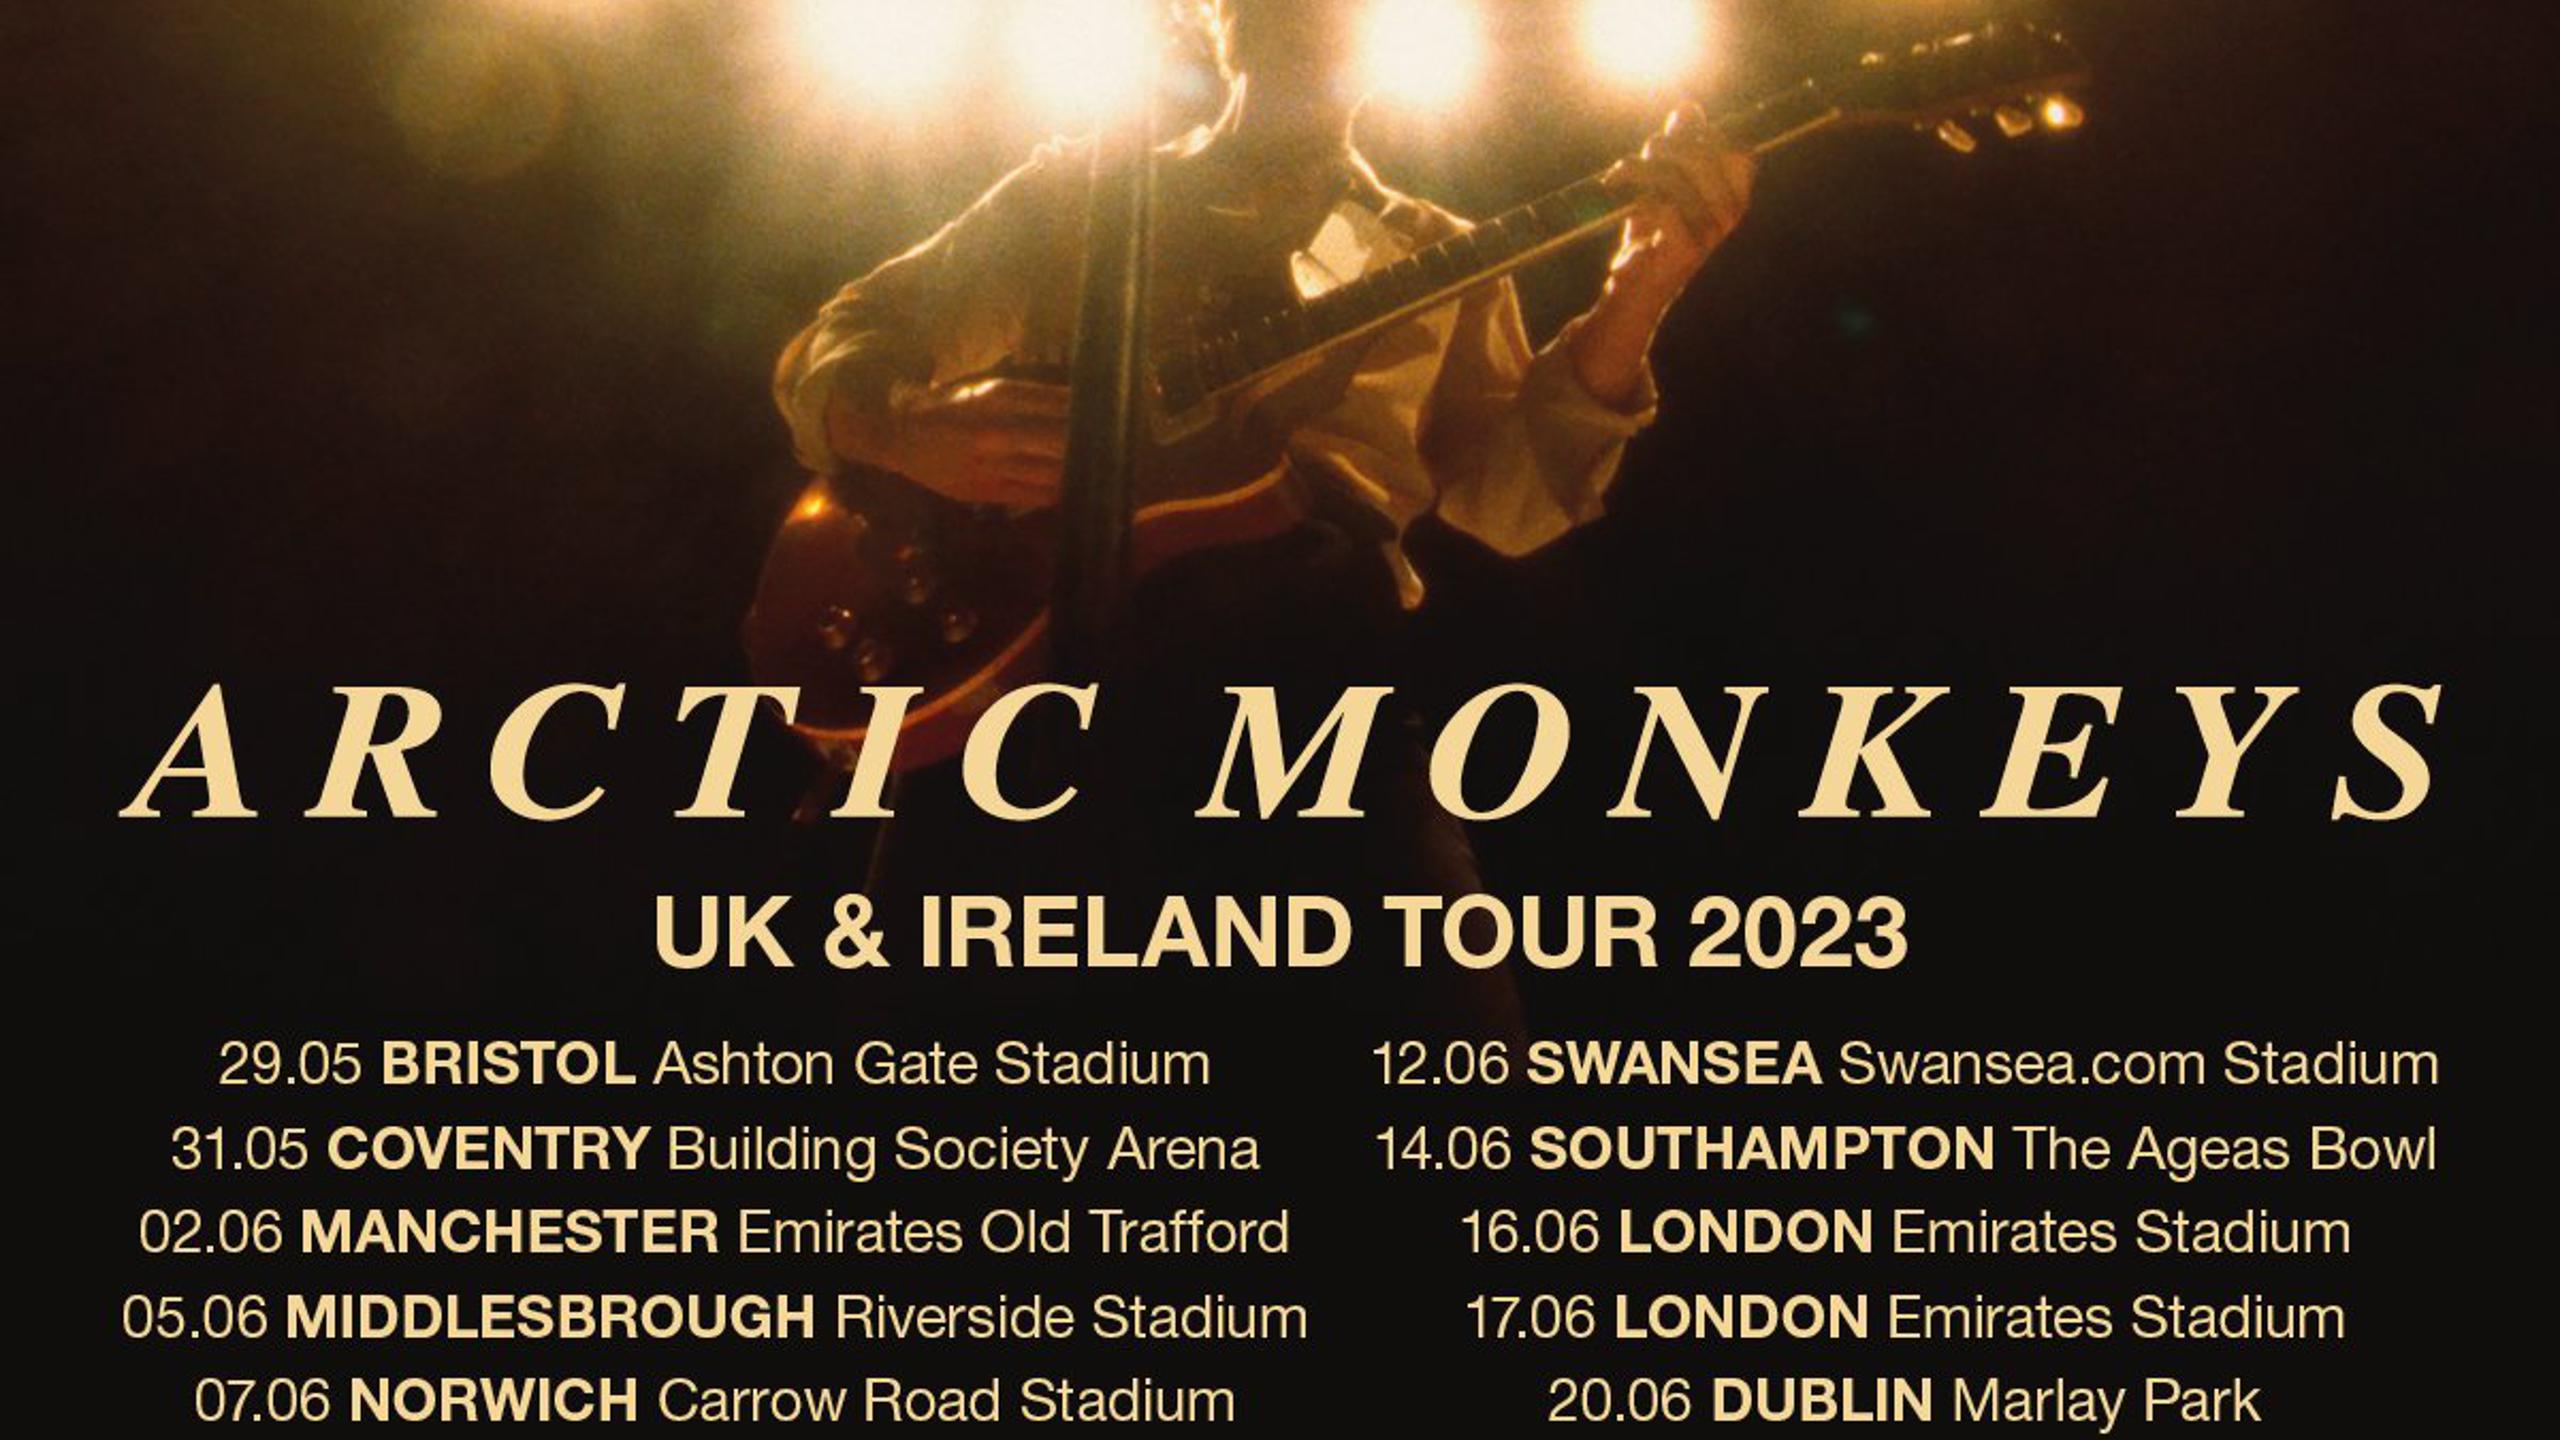 Arctic Monkeys, The Hives, The Mysterines concert tickets for